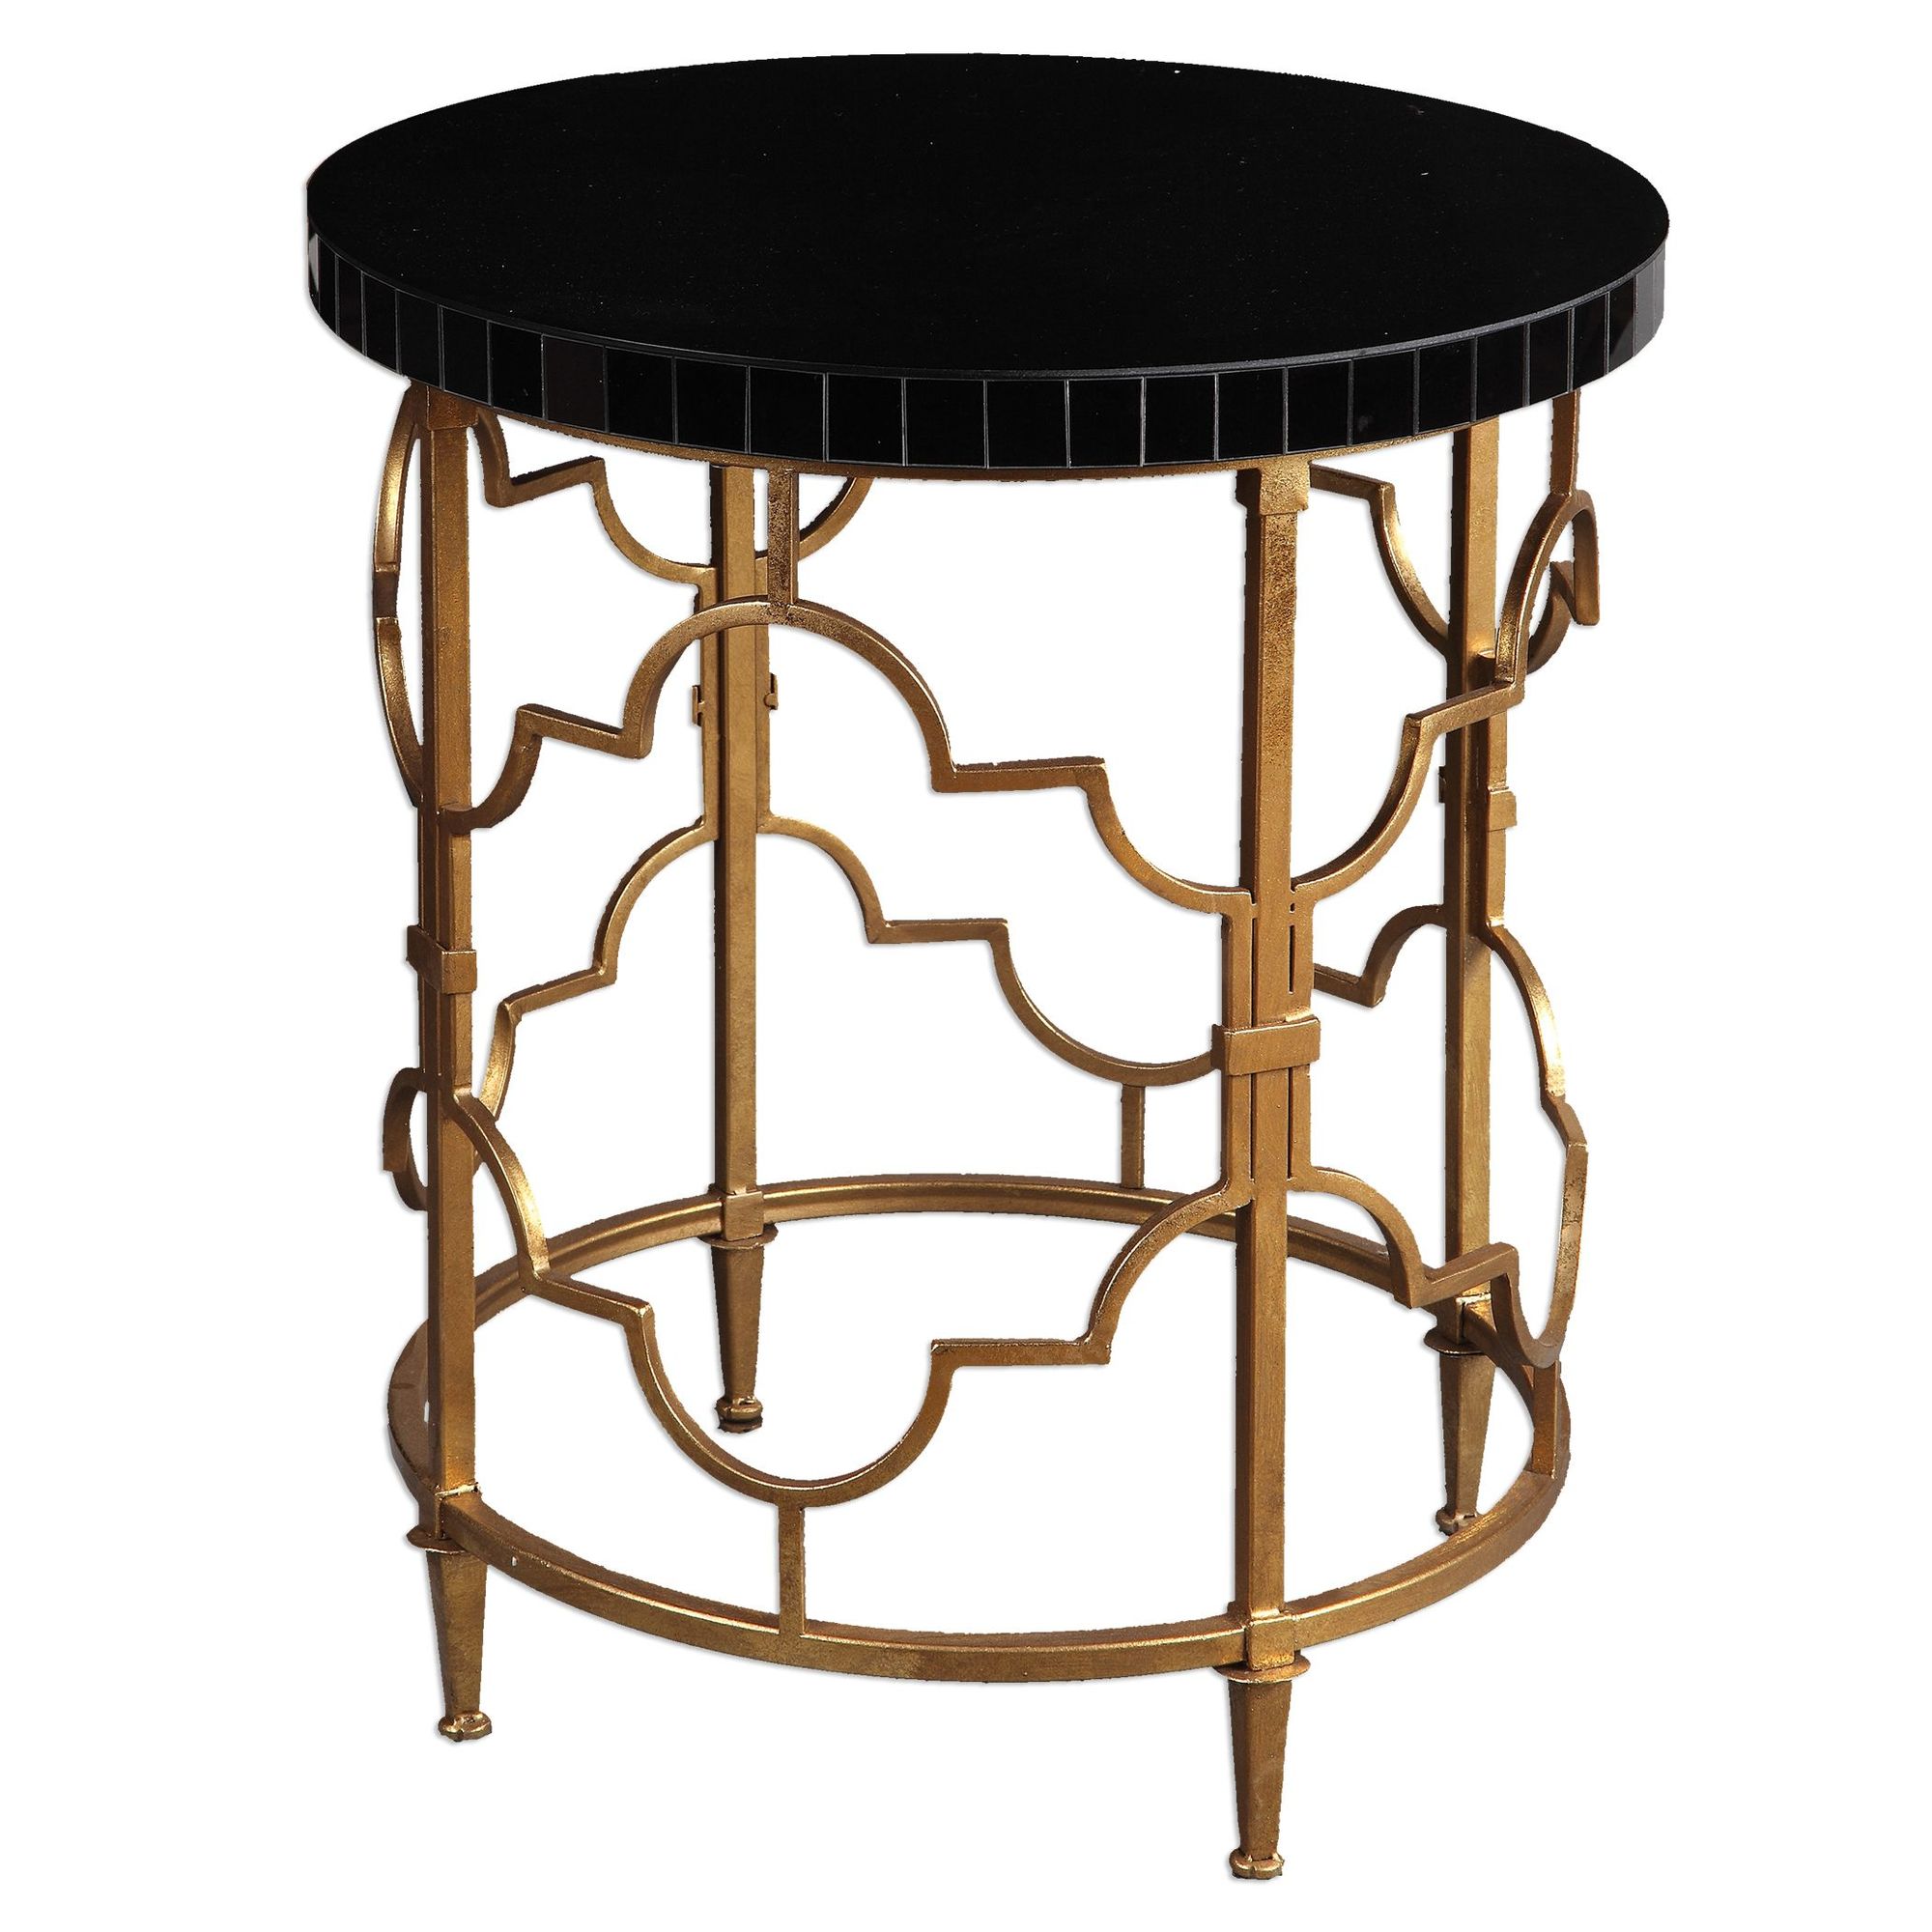 quatrefoil accent table antiqued gold leaf mathis brothers target leather sofa rowico furniture circular cover garden bar ideas small end round home accents dishes black glass